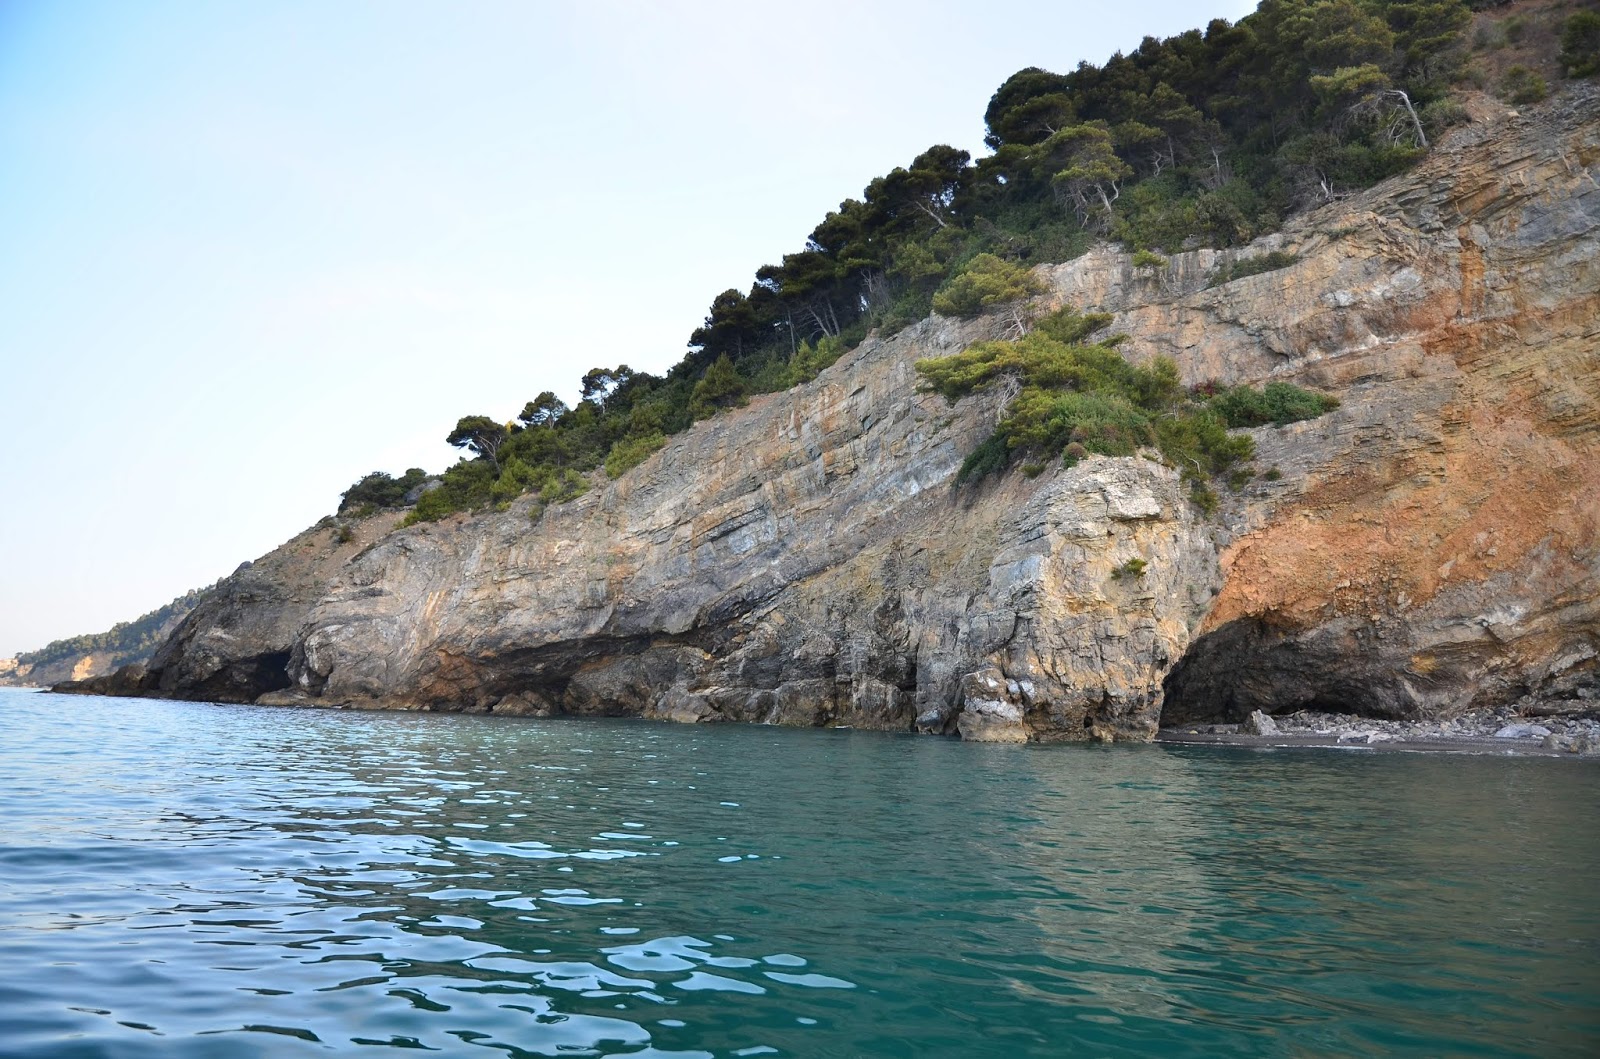 Photo of Spiaggia di Punta Bianca with tiny bay